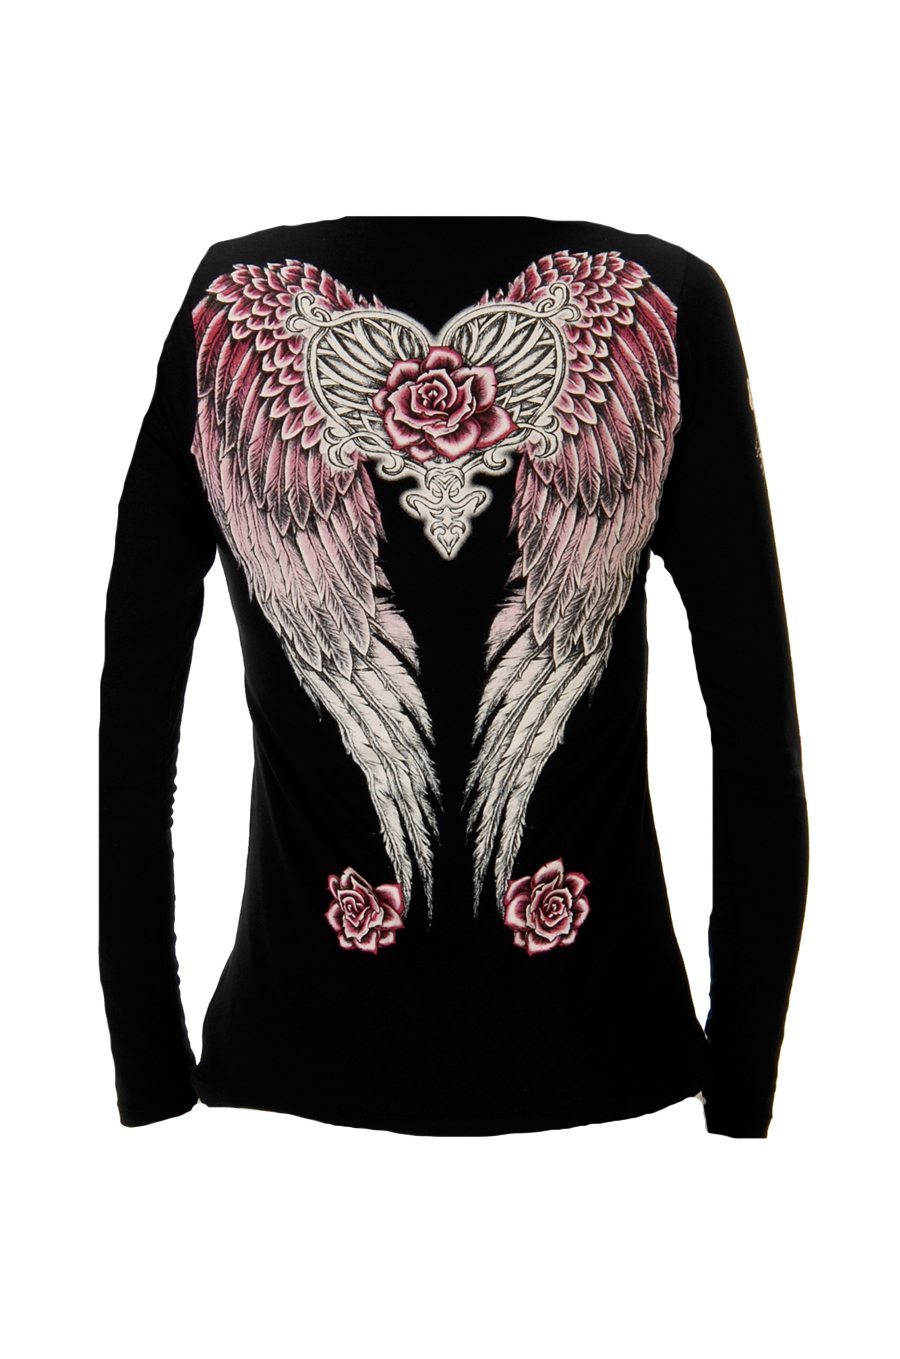 Liberty Wear Women's Top with Hearts, Roses, Wings Black Back View